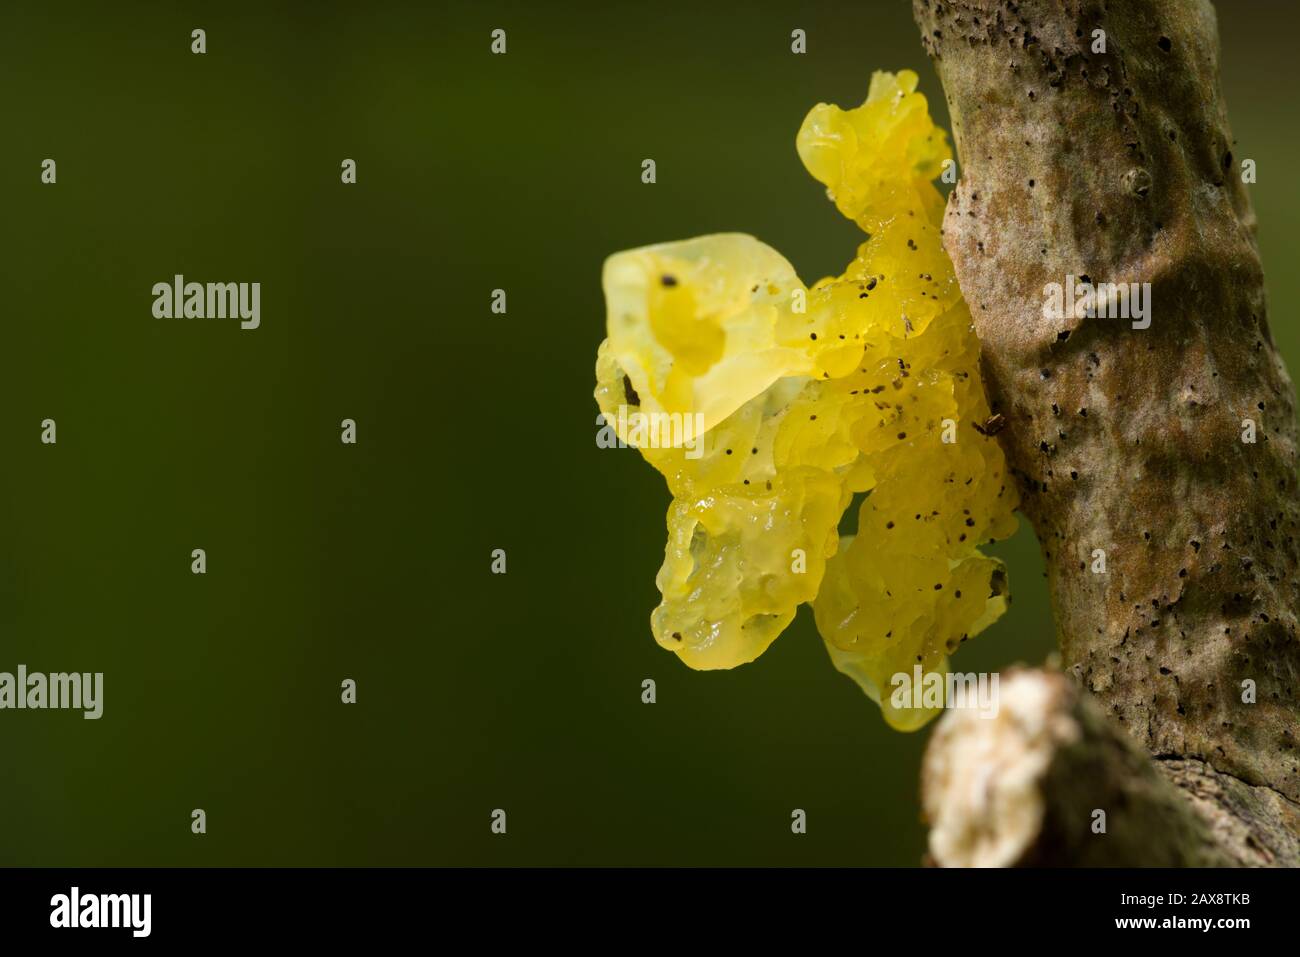 Yellow Brain (Tremella mesenterica) fungus on a tree branch in late summer. Also known as Golden Jelly Fungus, Yellow Trembler or Witches' Butter. Stock Photo